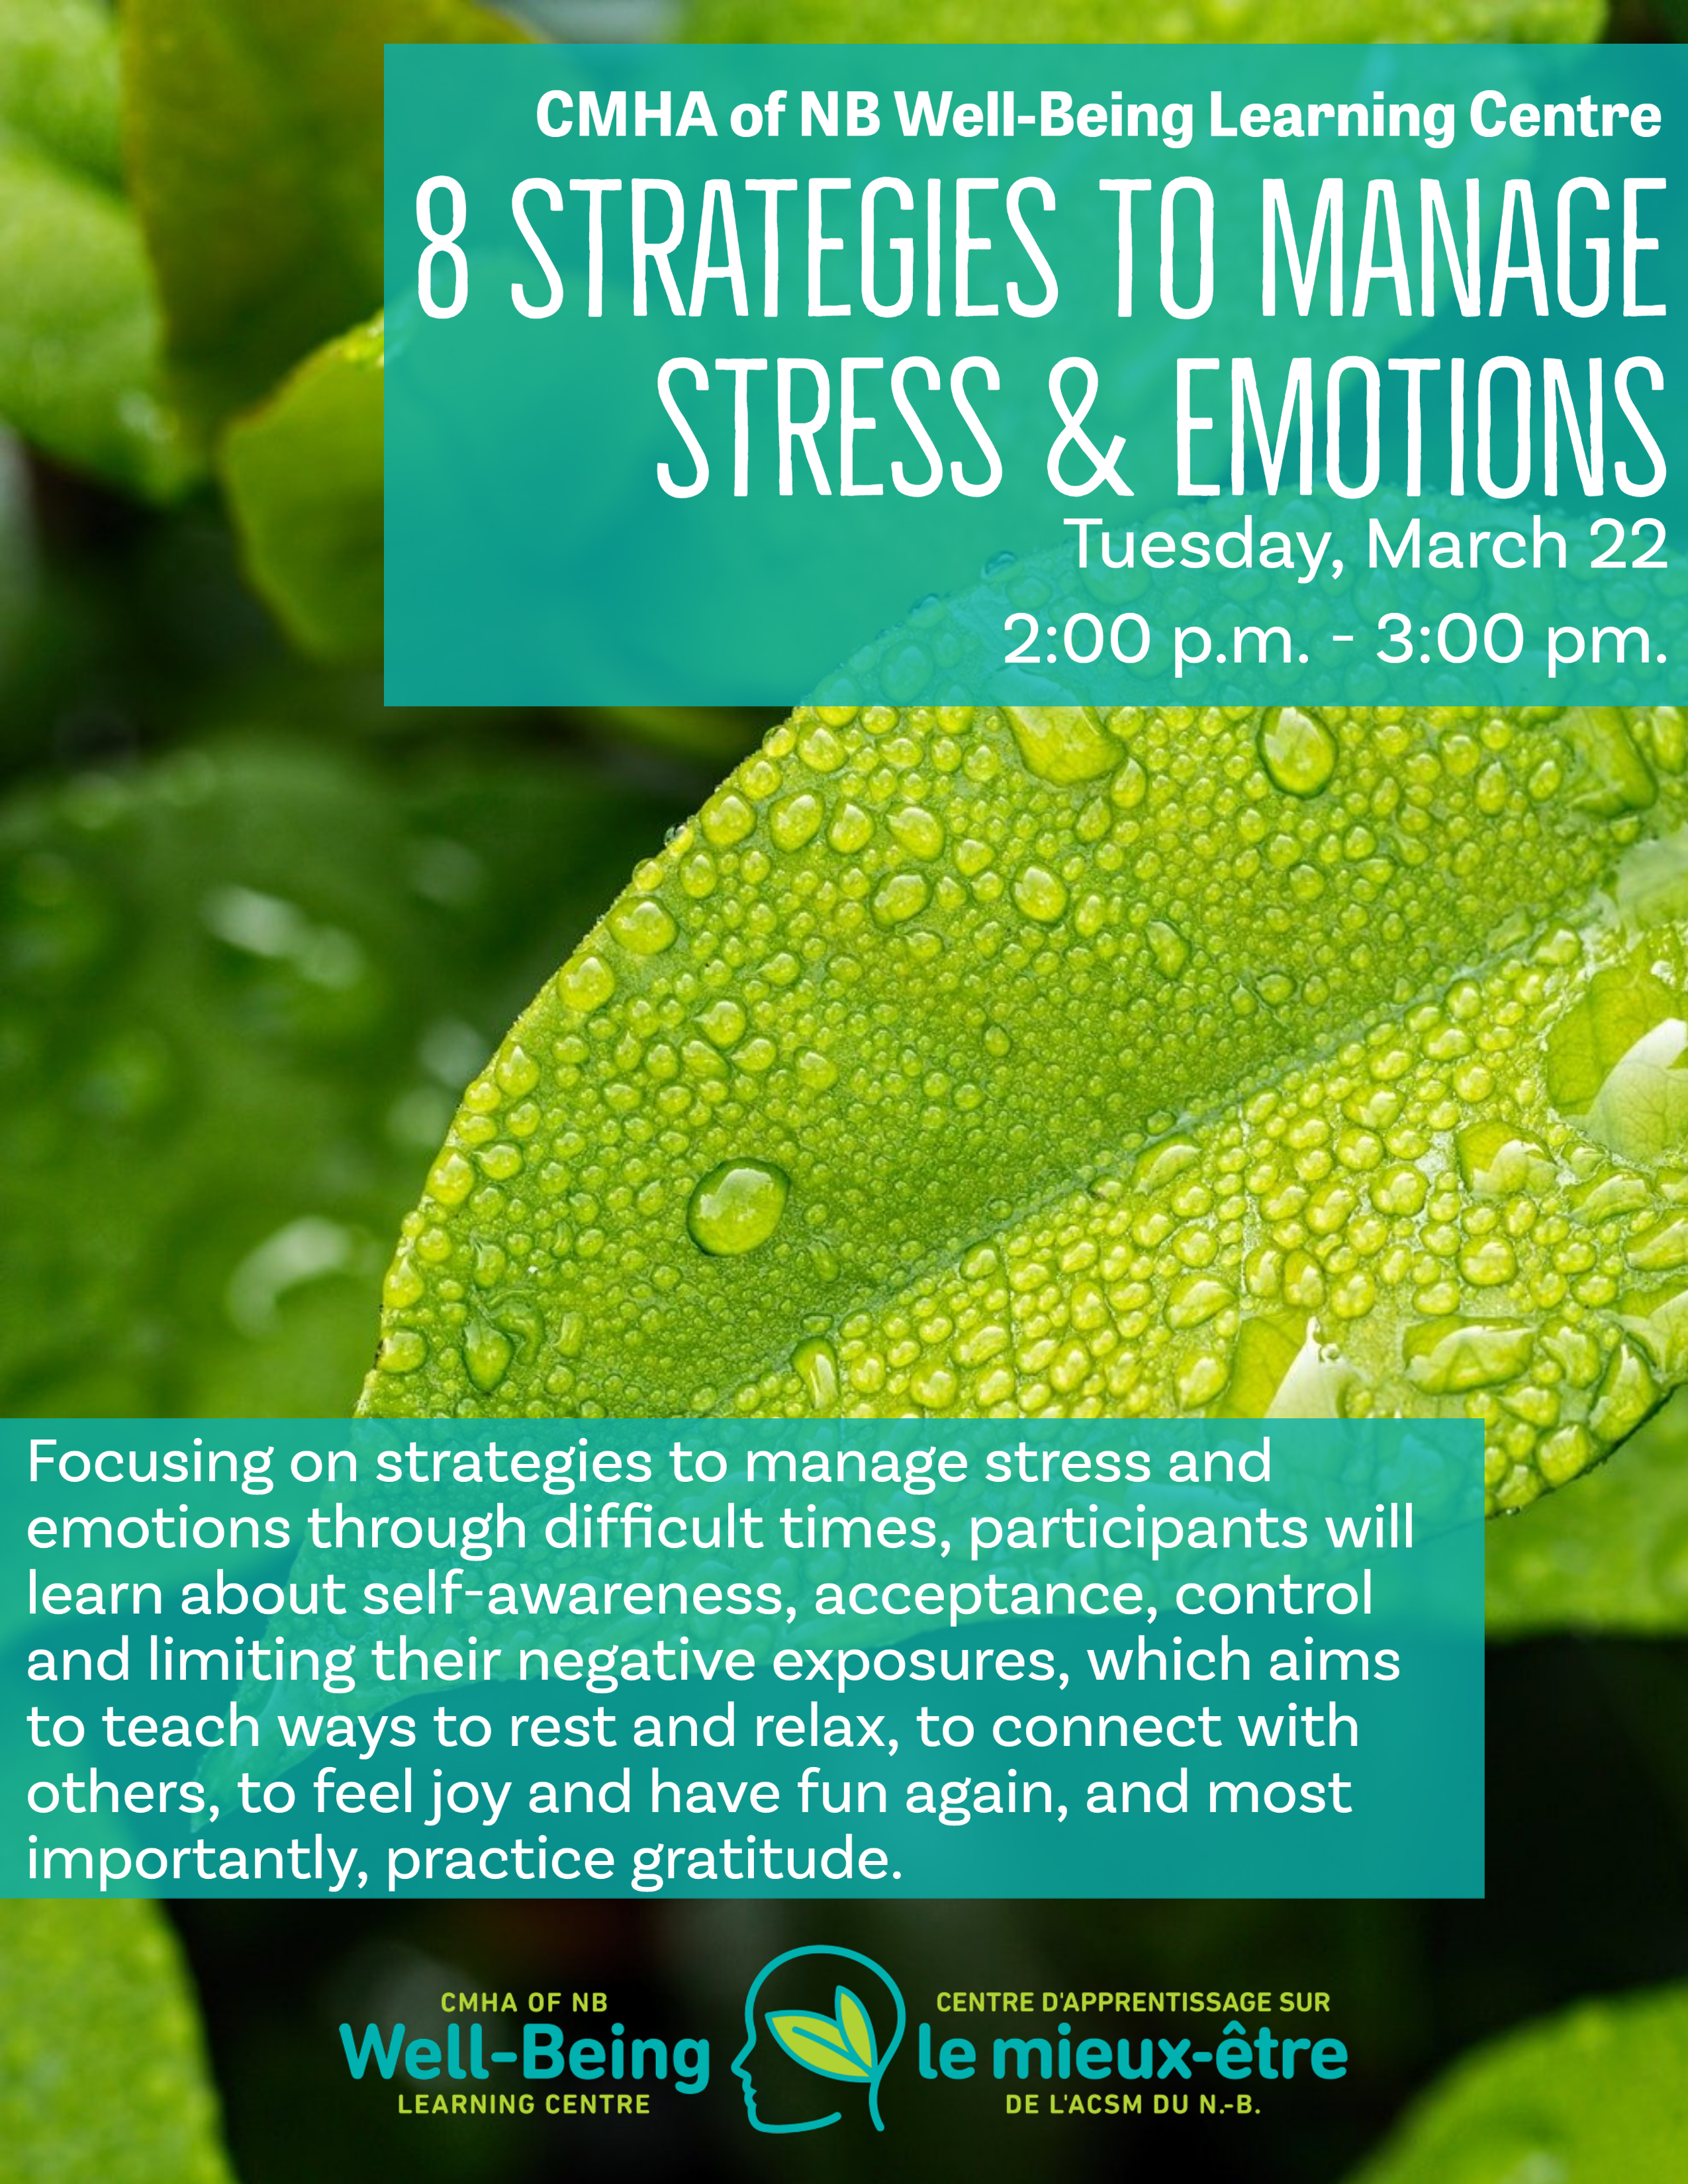 8 Strategies to Manage Stress & Emotions